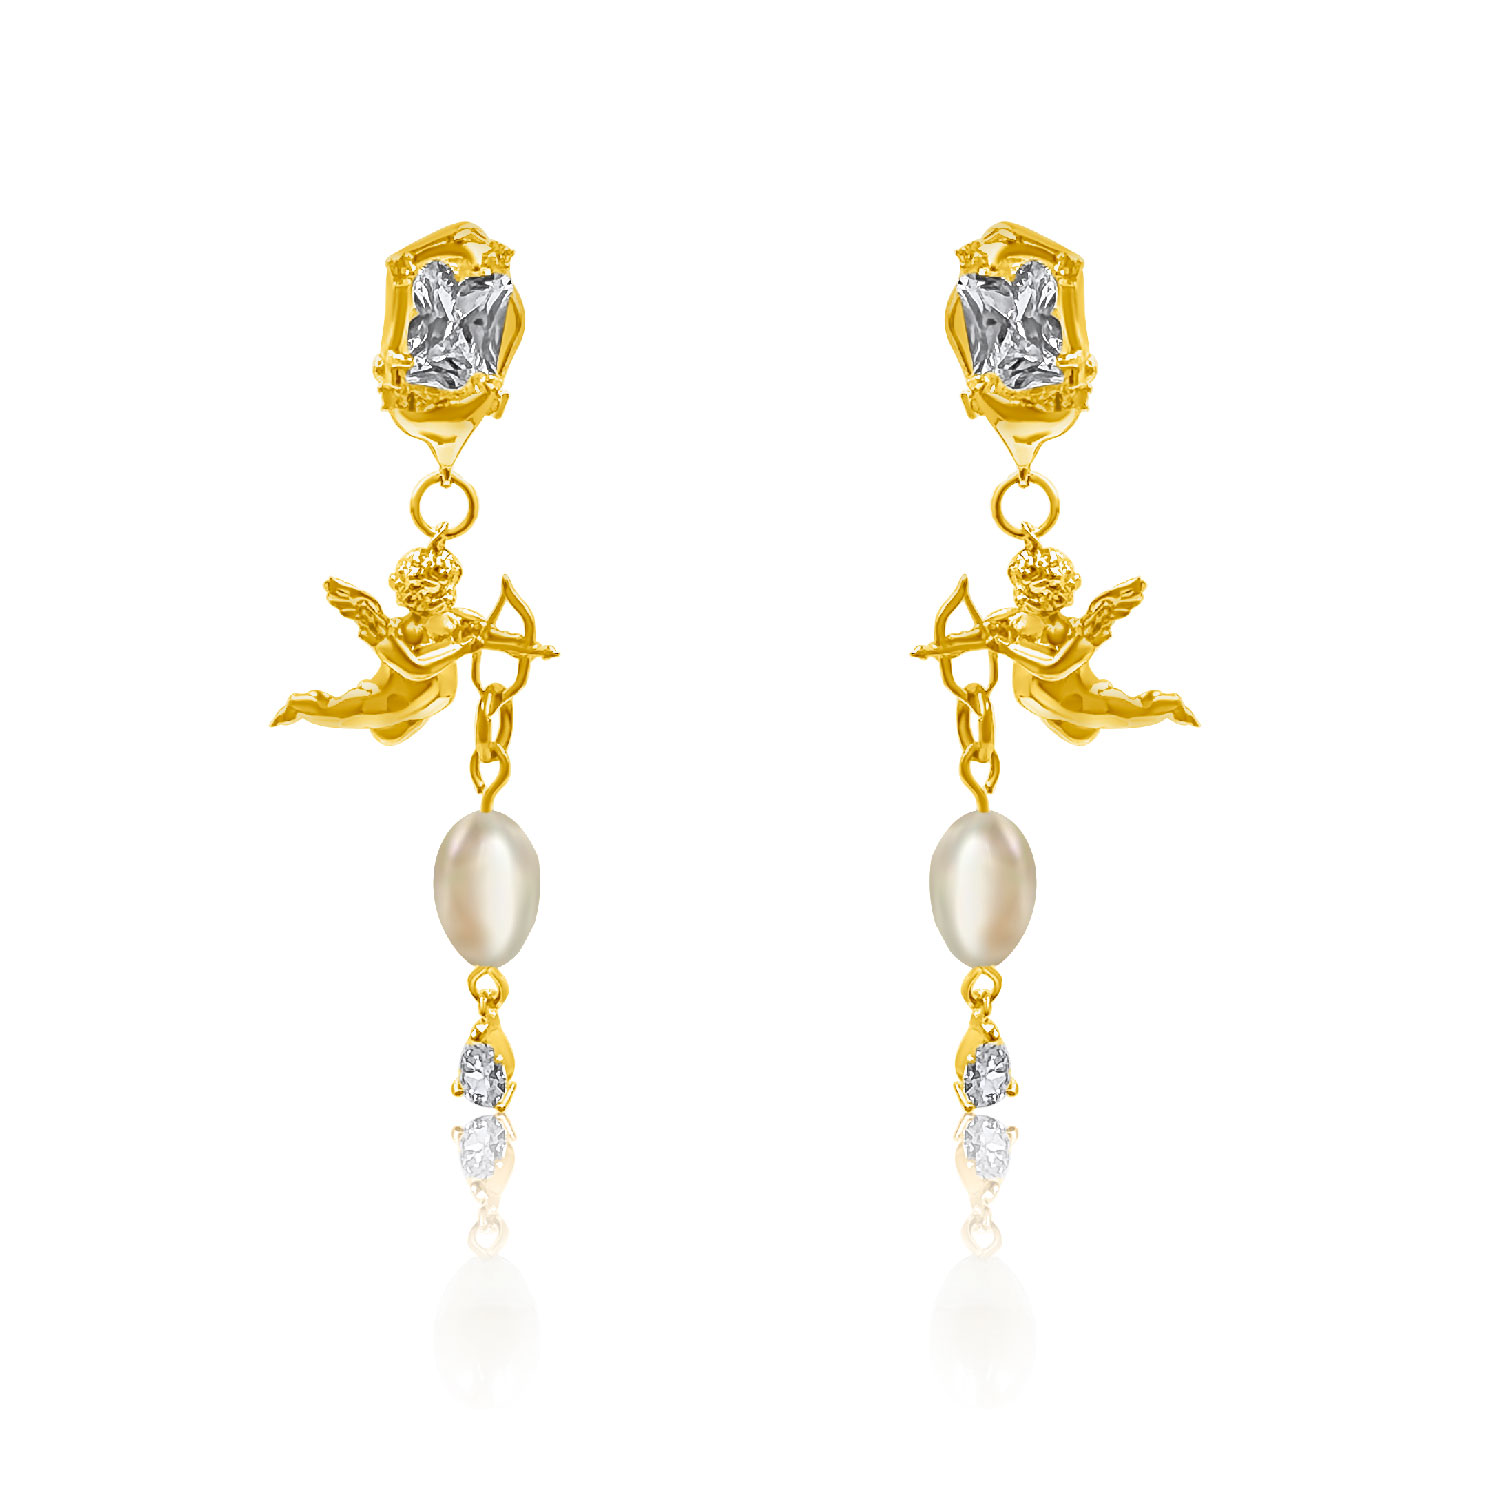 Women’s Neutrals / Gold / White Gold Filled Charm Earrings Androhmeda Jewelry